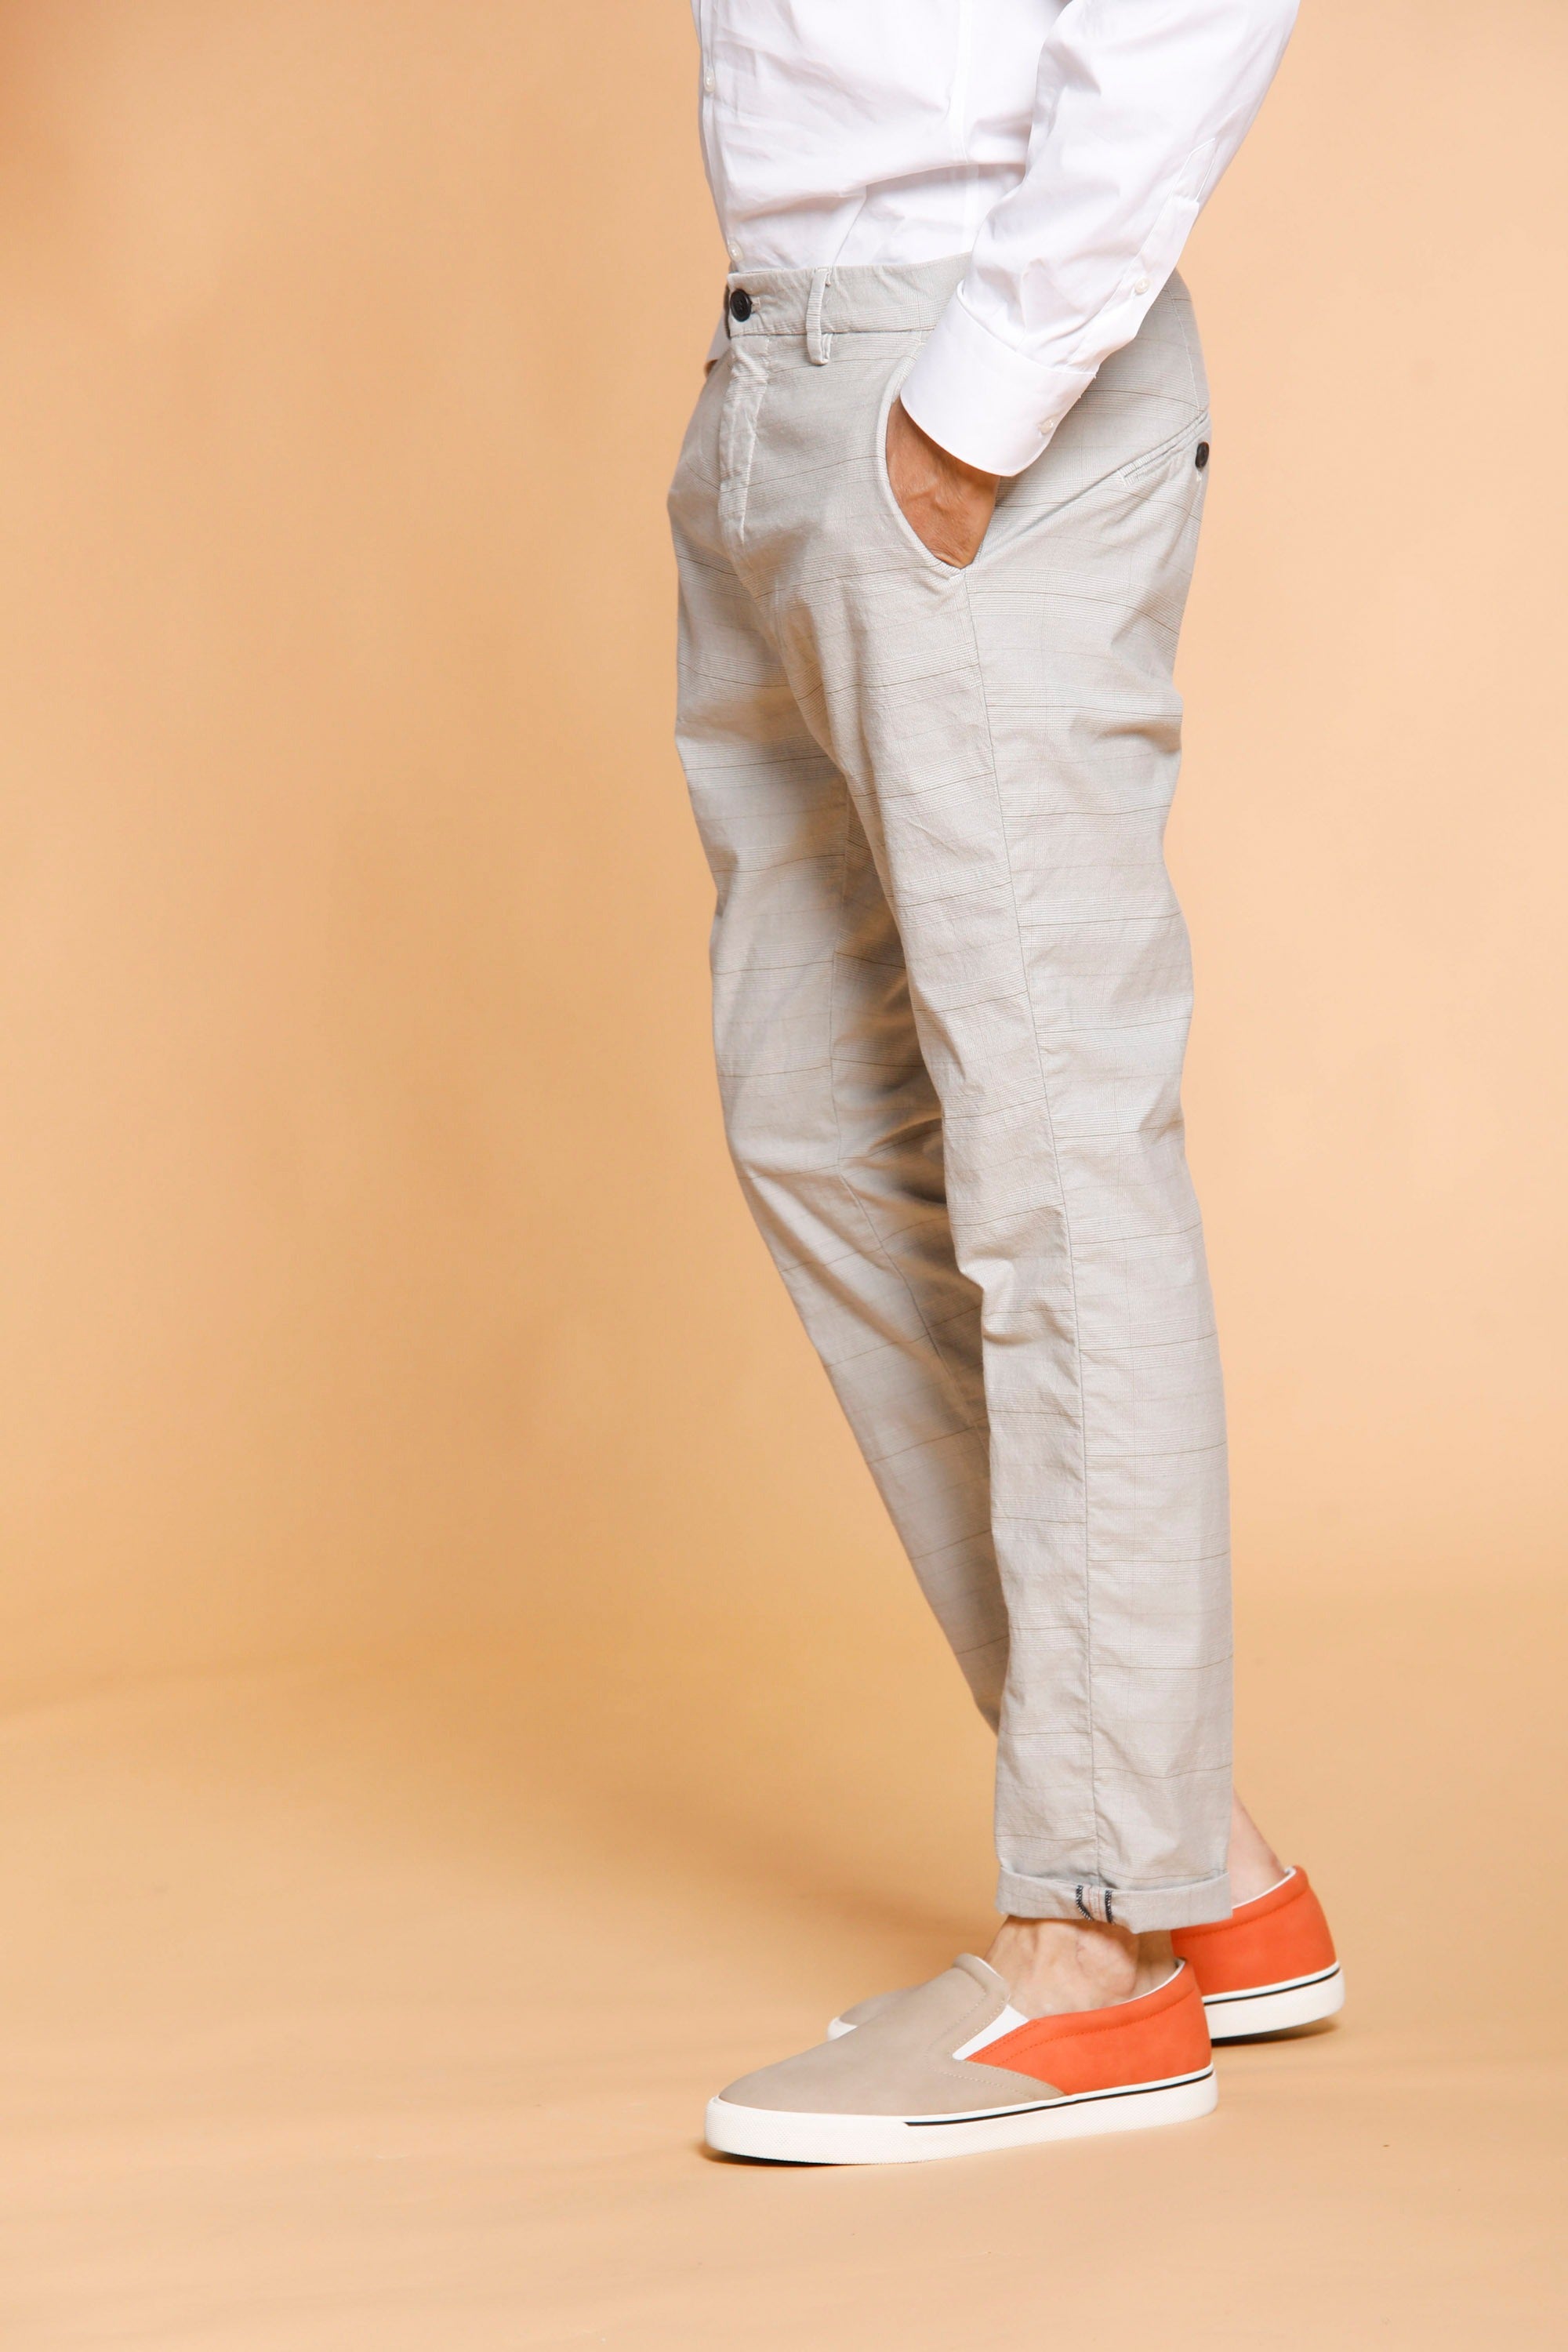 Osaka Style pantalone chino uomo in cotone galles mouliné carrot fit